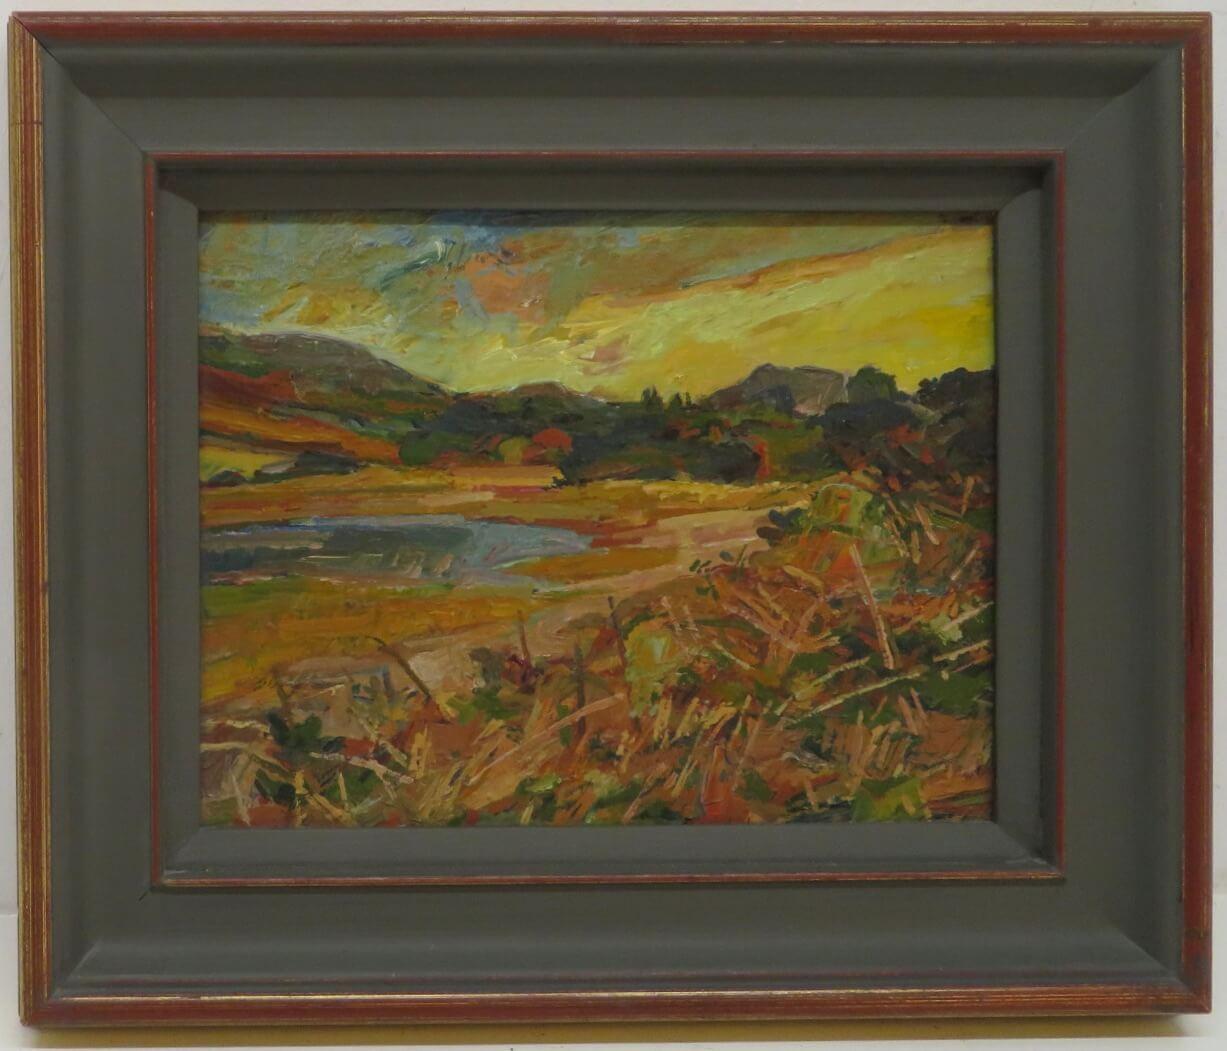 Original Impressionist Oil Painting WELSH ART ANGLESEY by Selwyn Jones RCA 